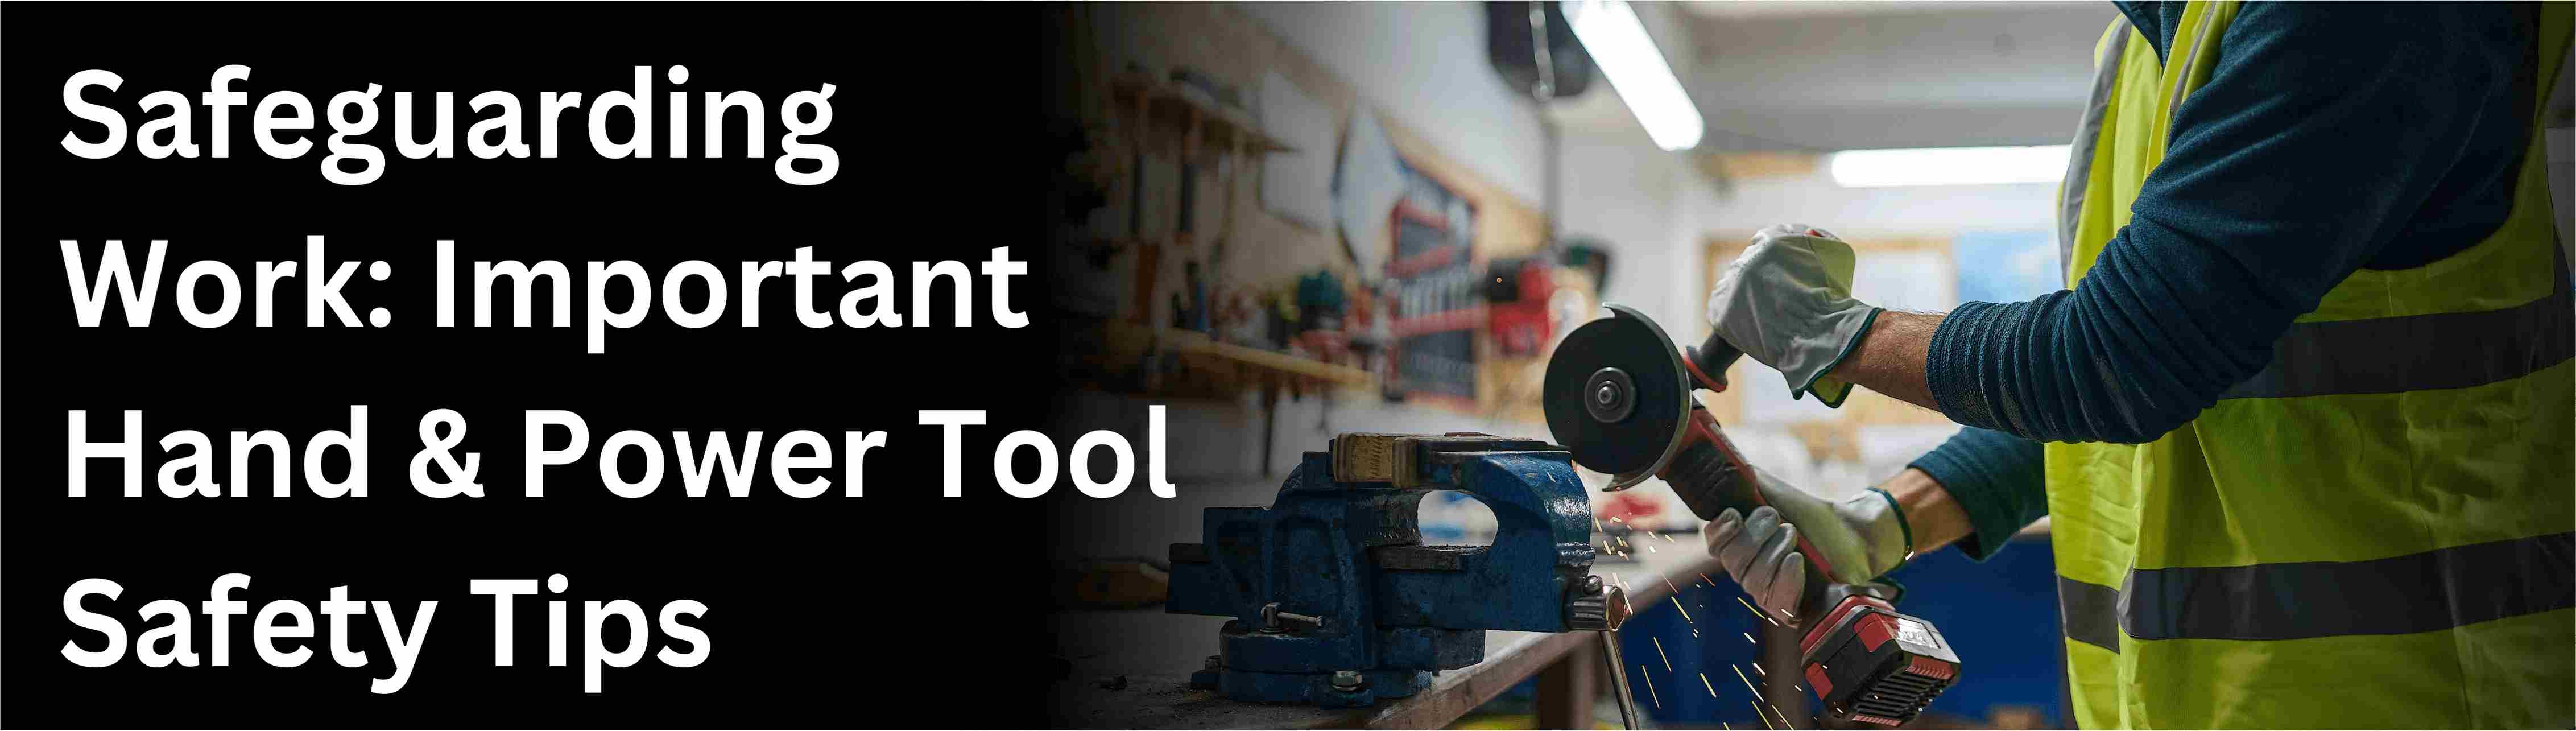 Safeguarding Work: Important Hand & Power Tool Safety Tips